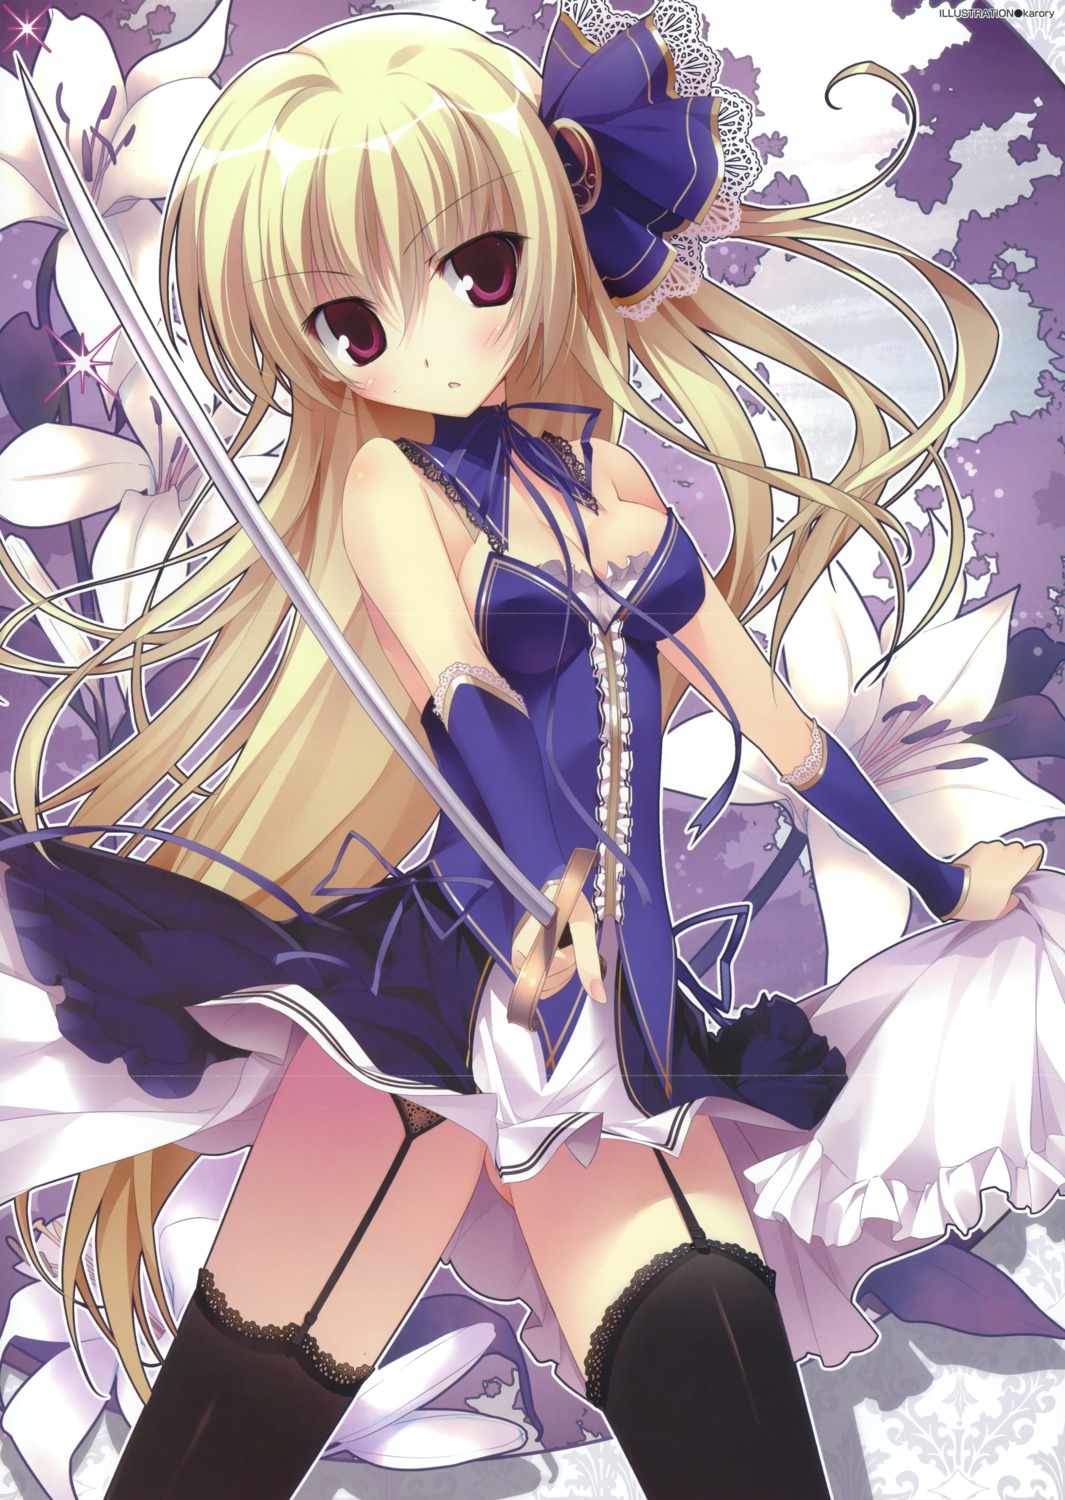 cleavage crease karory stockings sword thighhighs